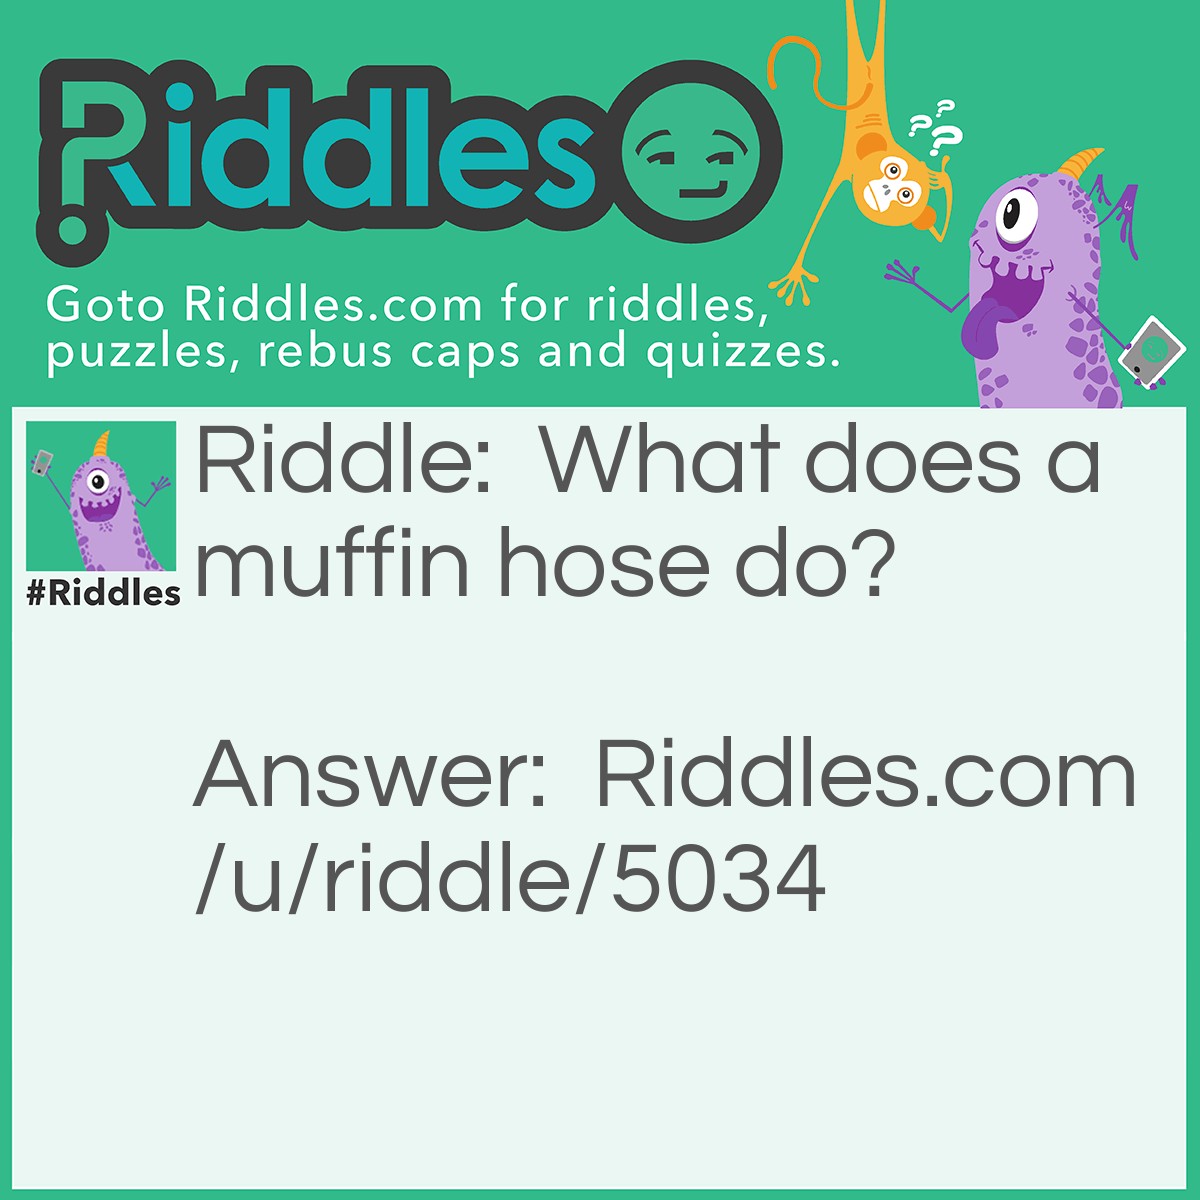 Riddle: What does a muffin hose do? Answer: It does not exist. Muffin hoses are not real!